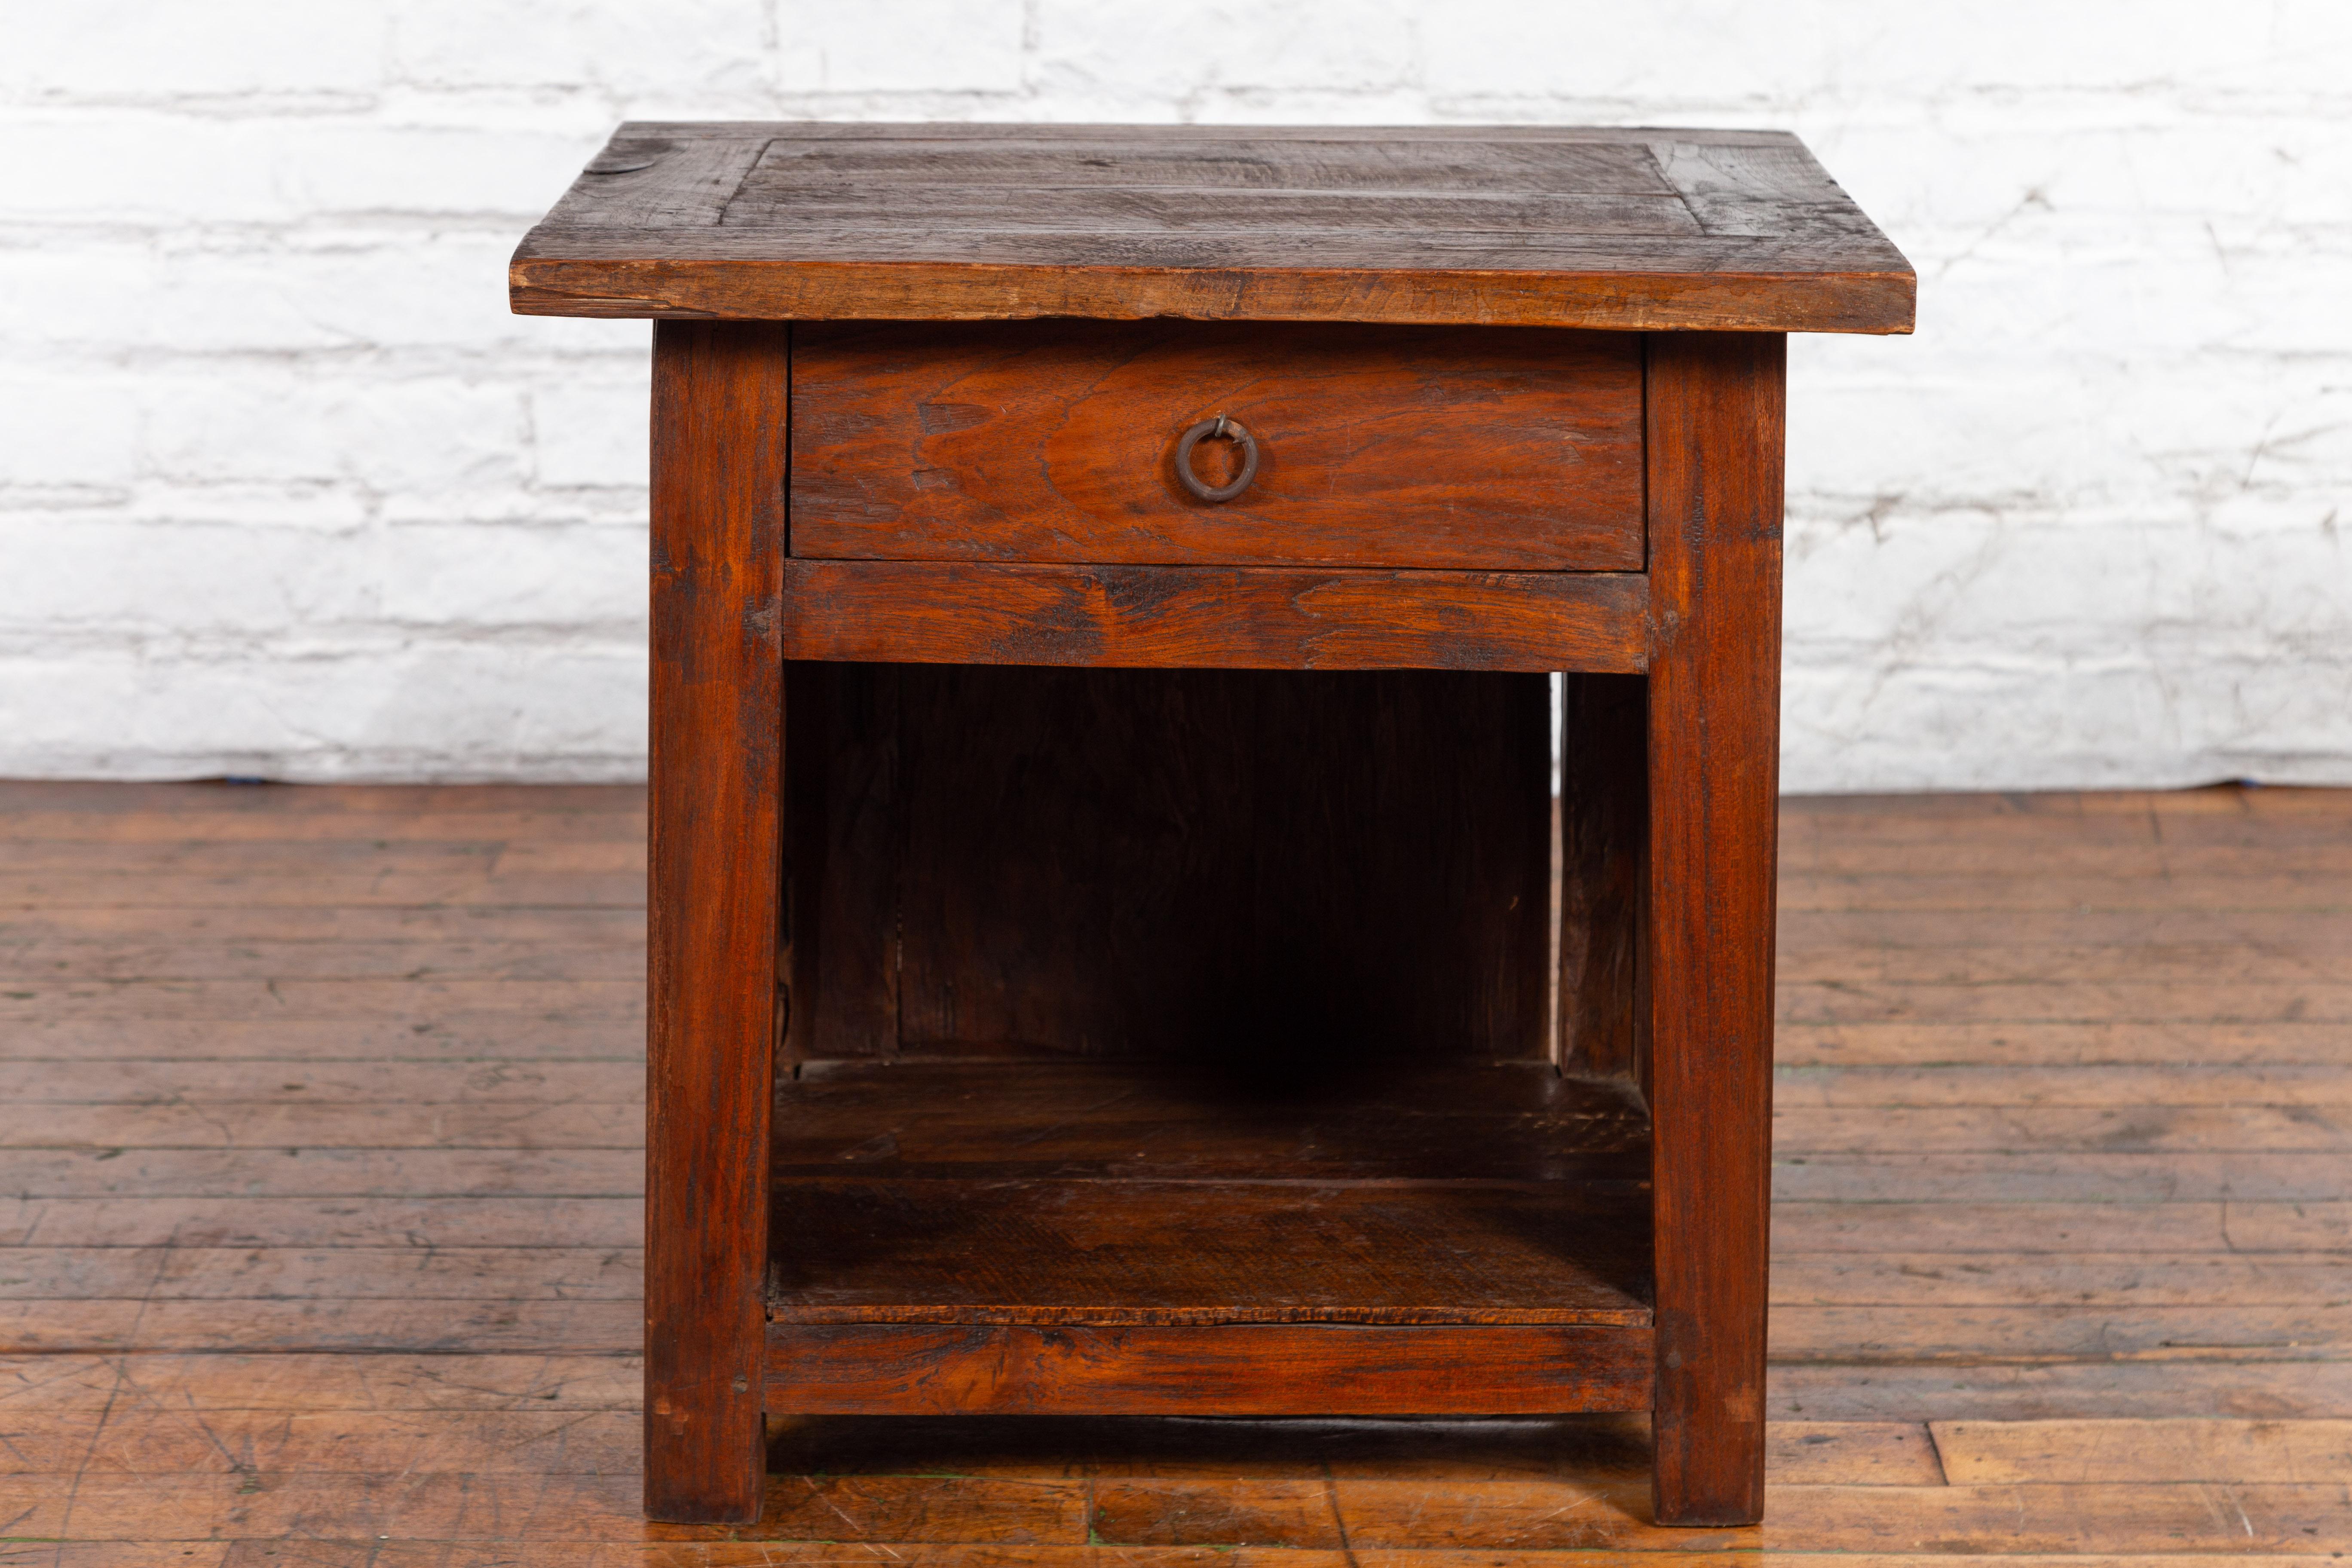 An antique Javanese wooden bedside cabinet from the early 20th century, with single drawer, open shelf and nice patina. Created on the Indonesian island of Java during the early years of the 20th century, this wooden bedside cabinet features a